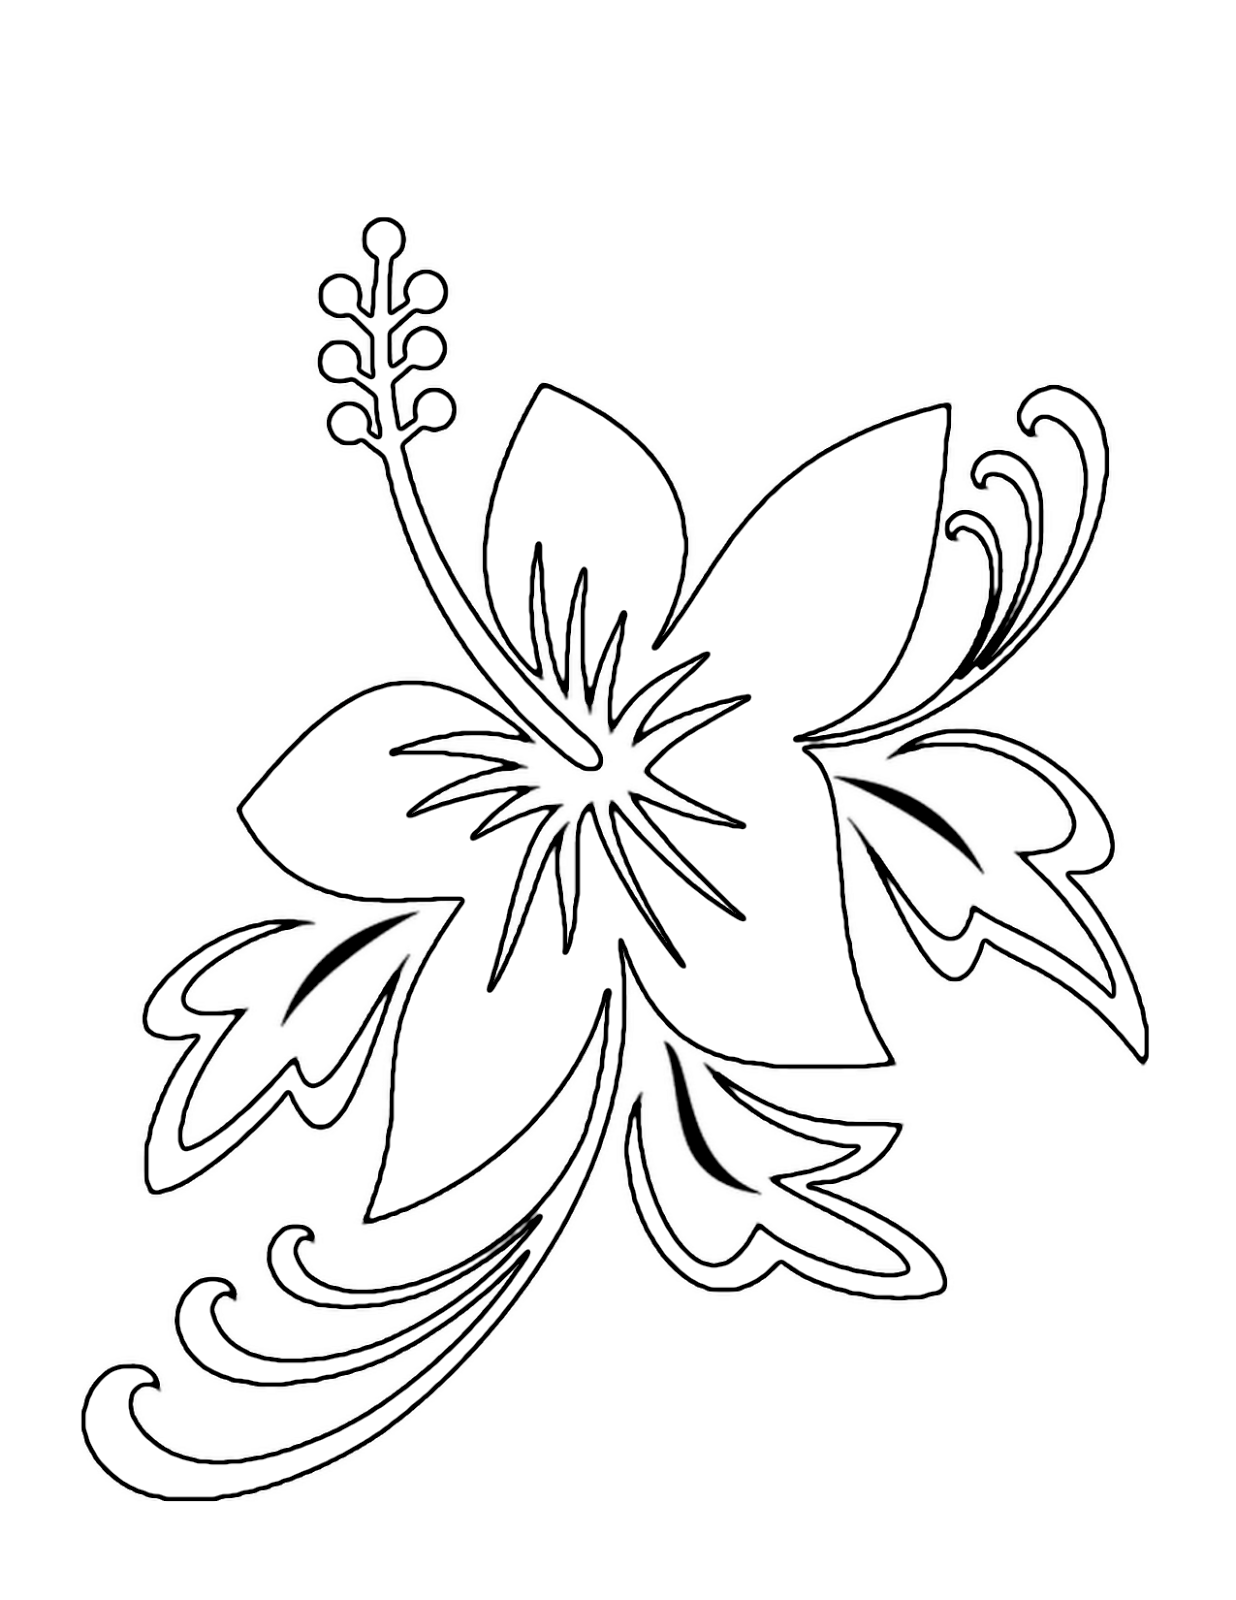 Printable Flower Pictures To Color - Beautiful Flowers